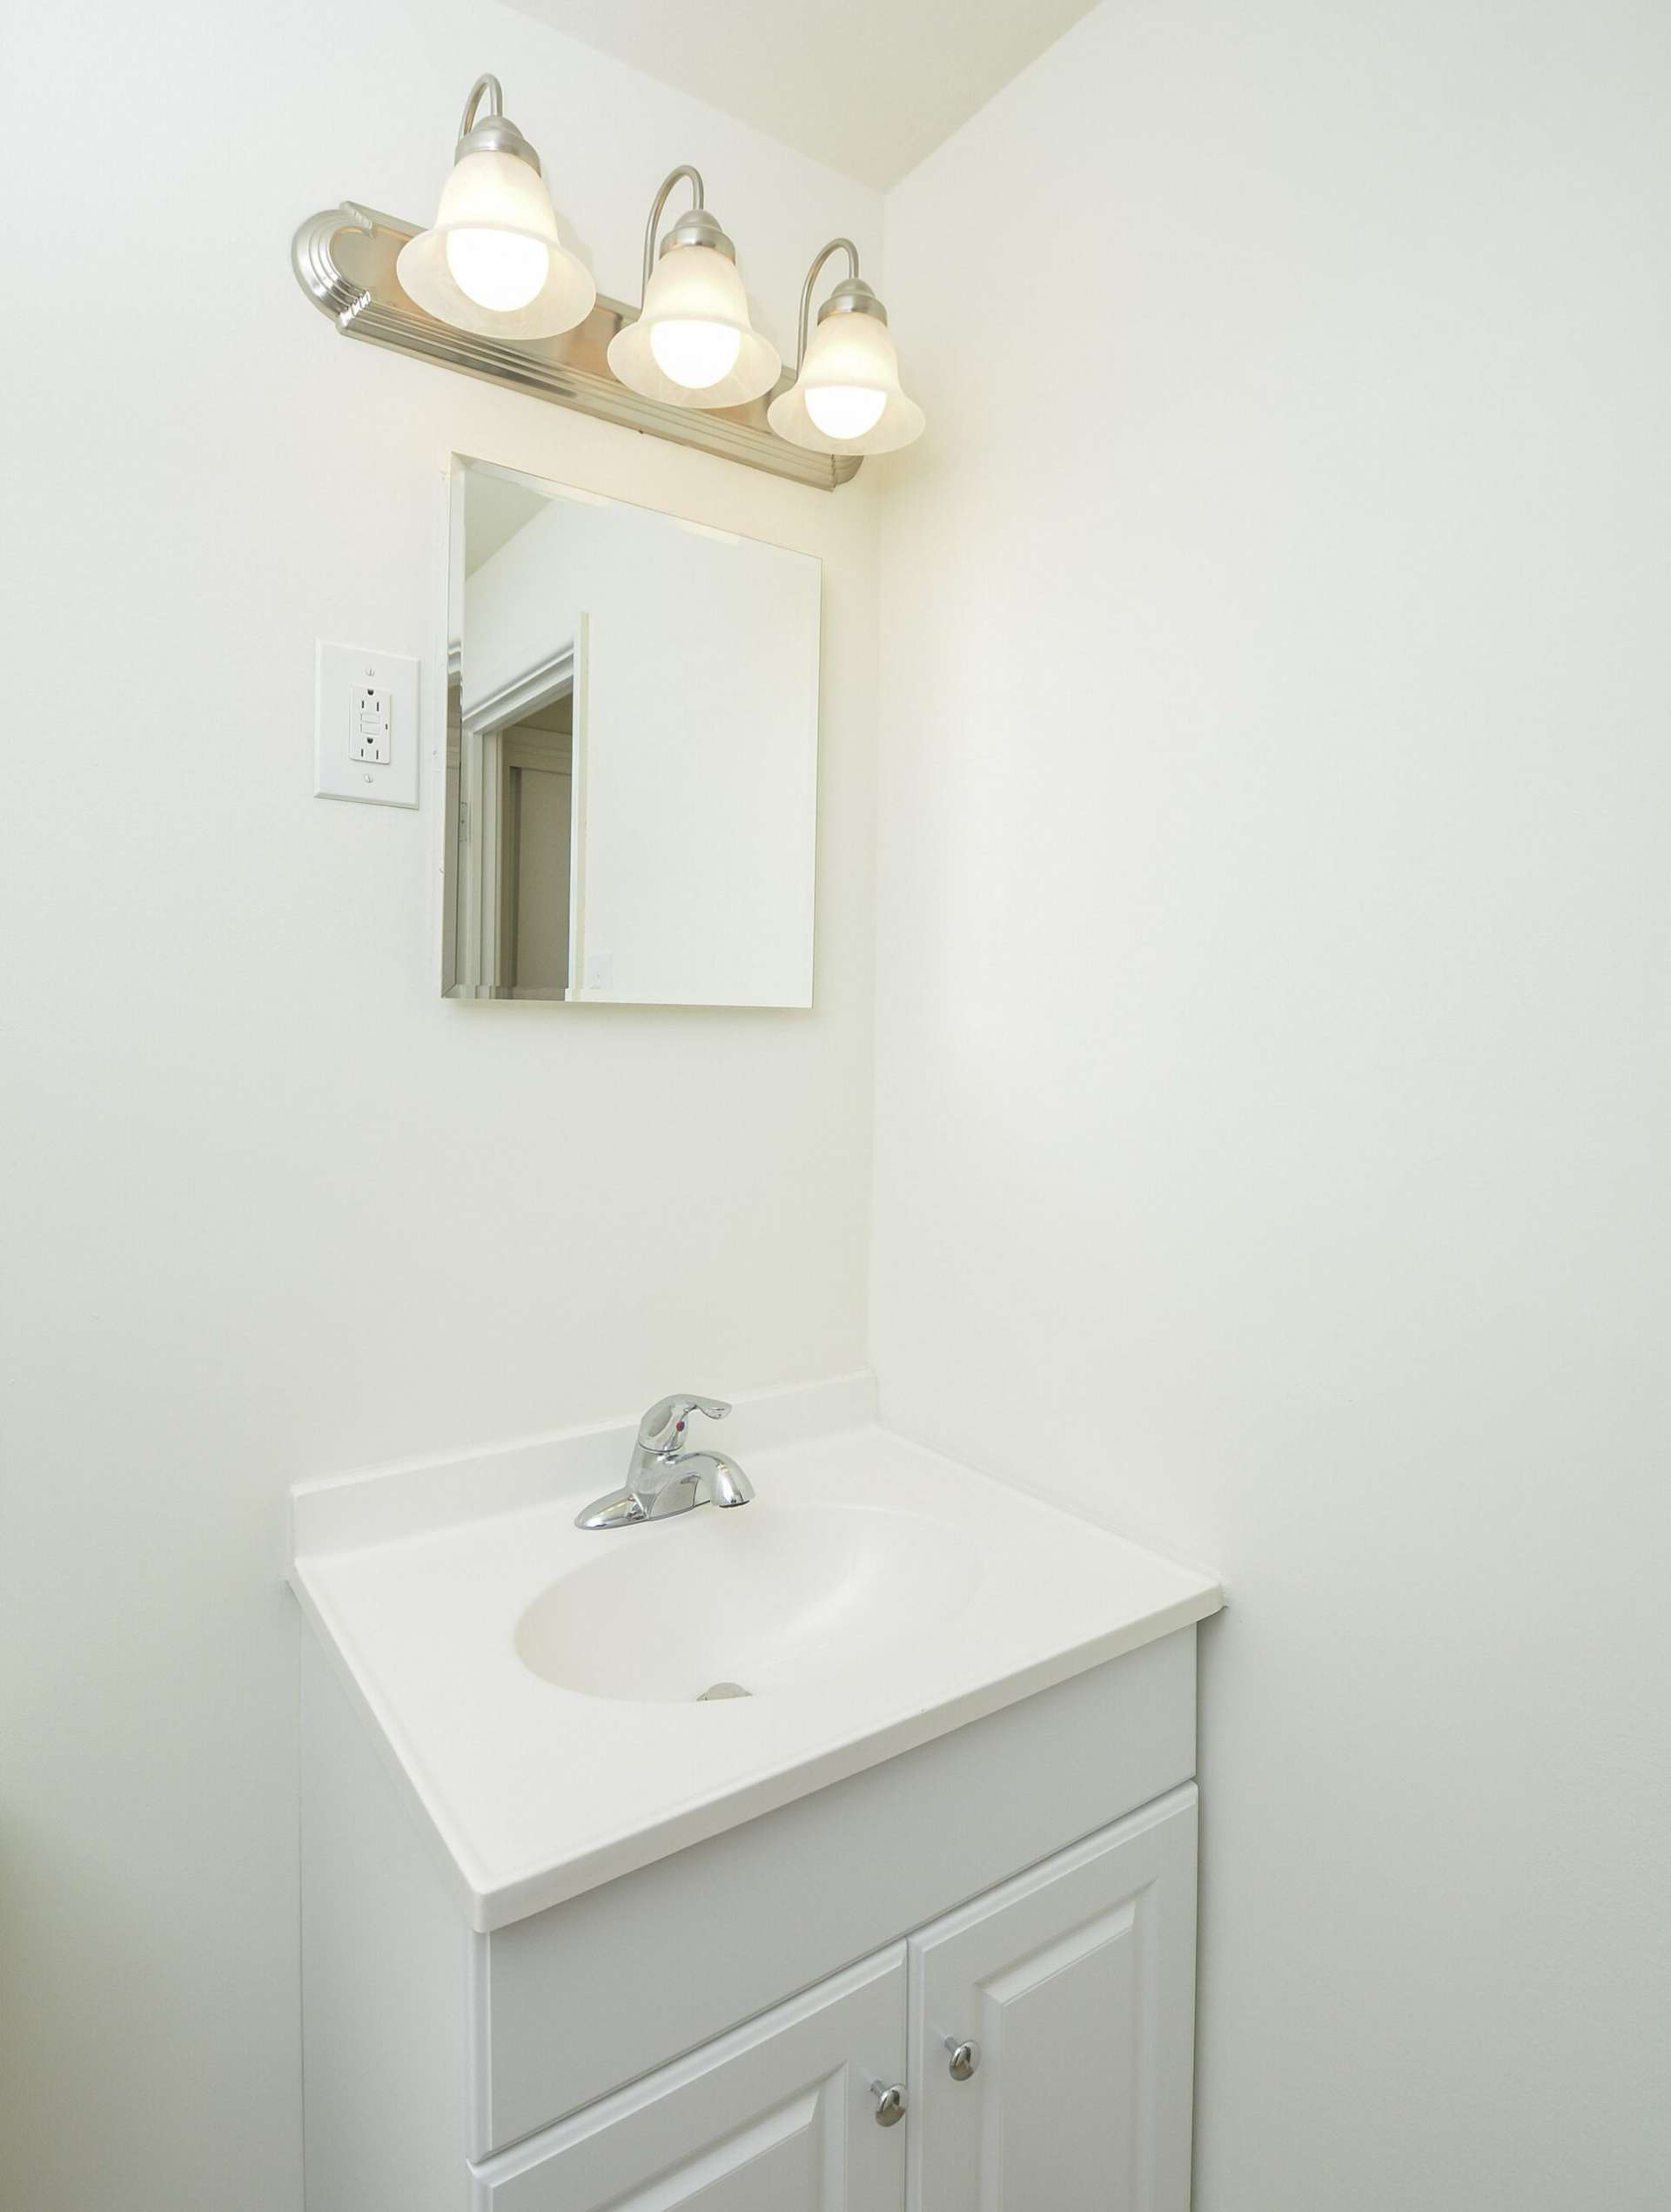 Sink with white cabinets and a small mirror above it.